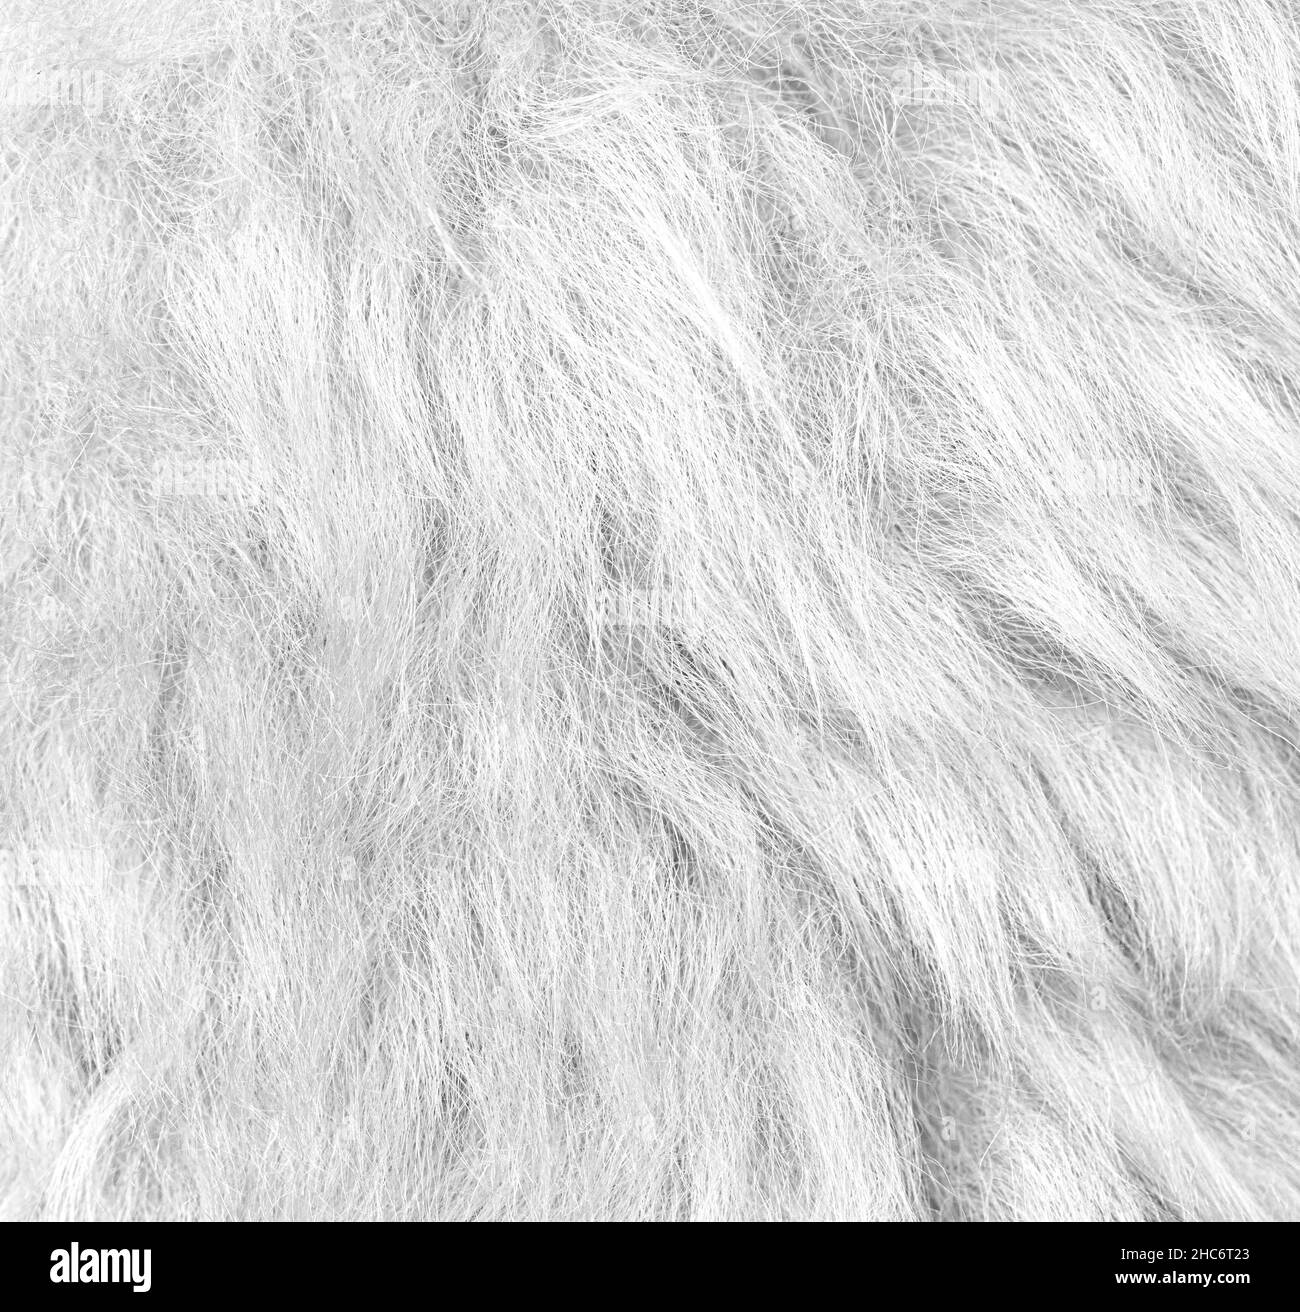 White soft wool texture background, cotton wool, light natural sheep wool, close-up texture of white fluffy fur, wool with beige tone, fur with a deli Stock Photo